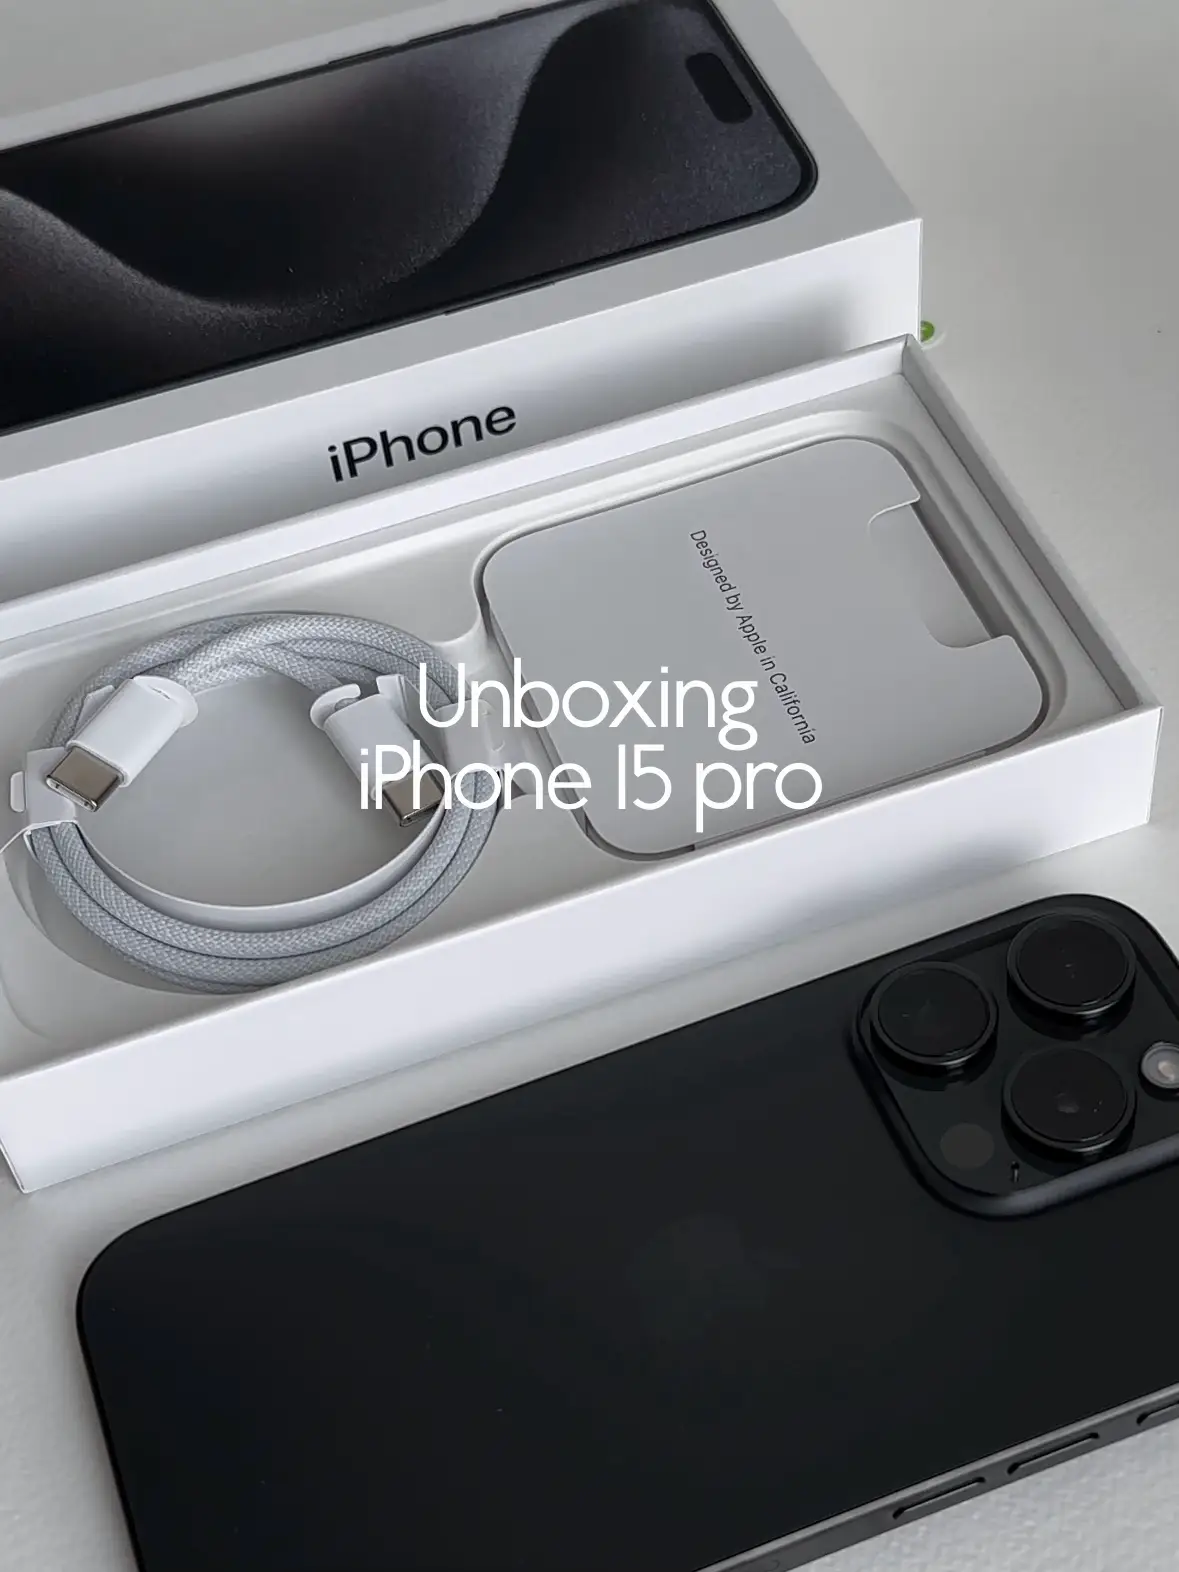 UNBOXING iPhone 15 Model - Apple DID IT! 